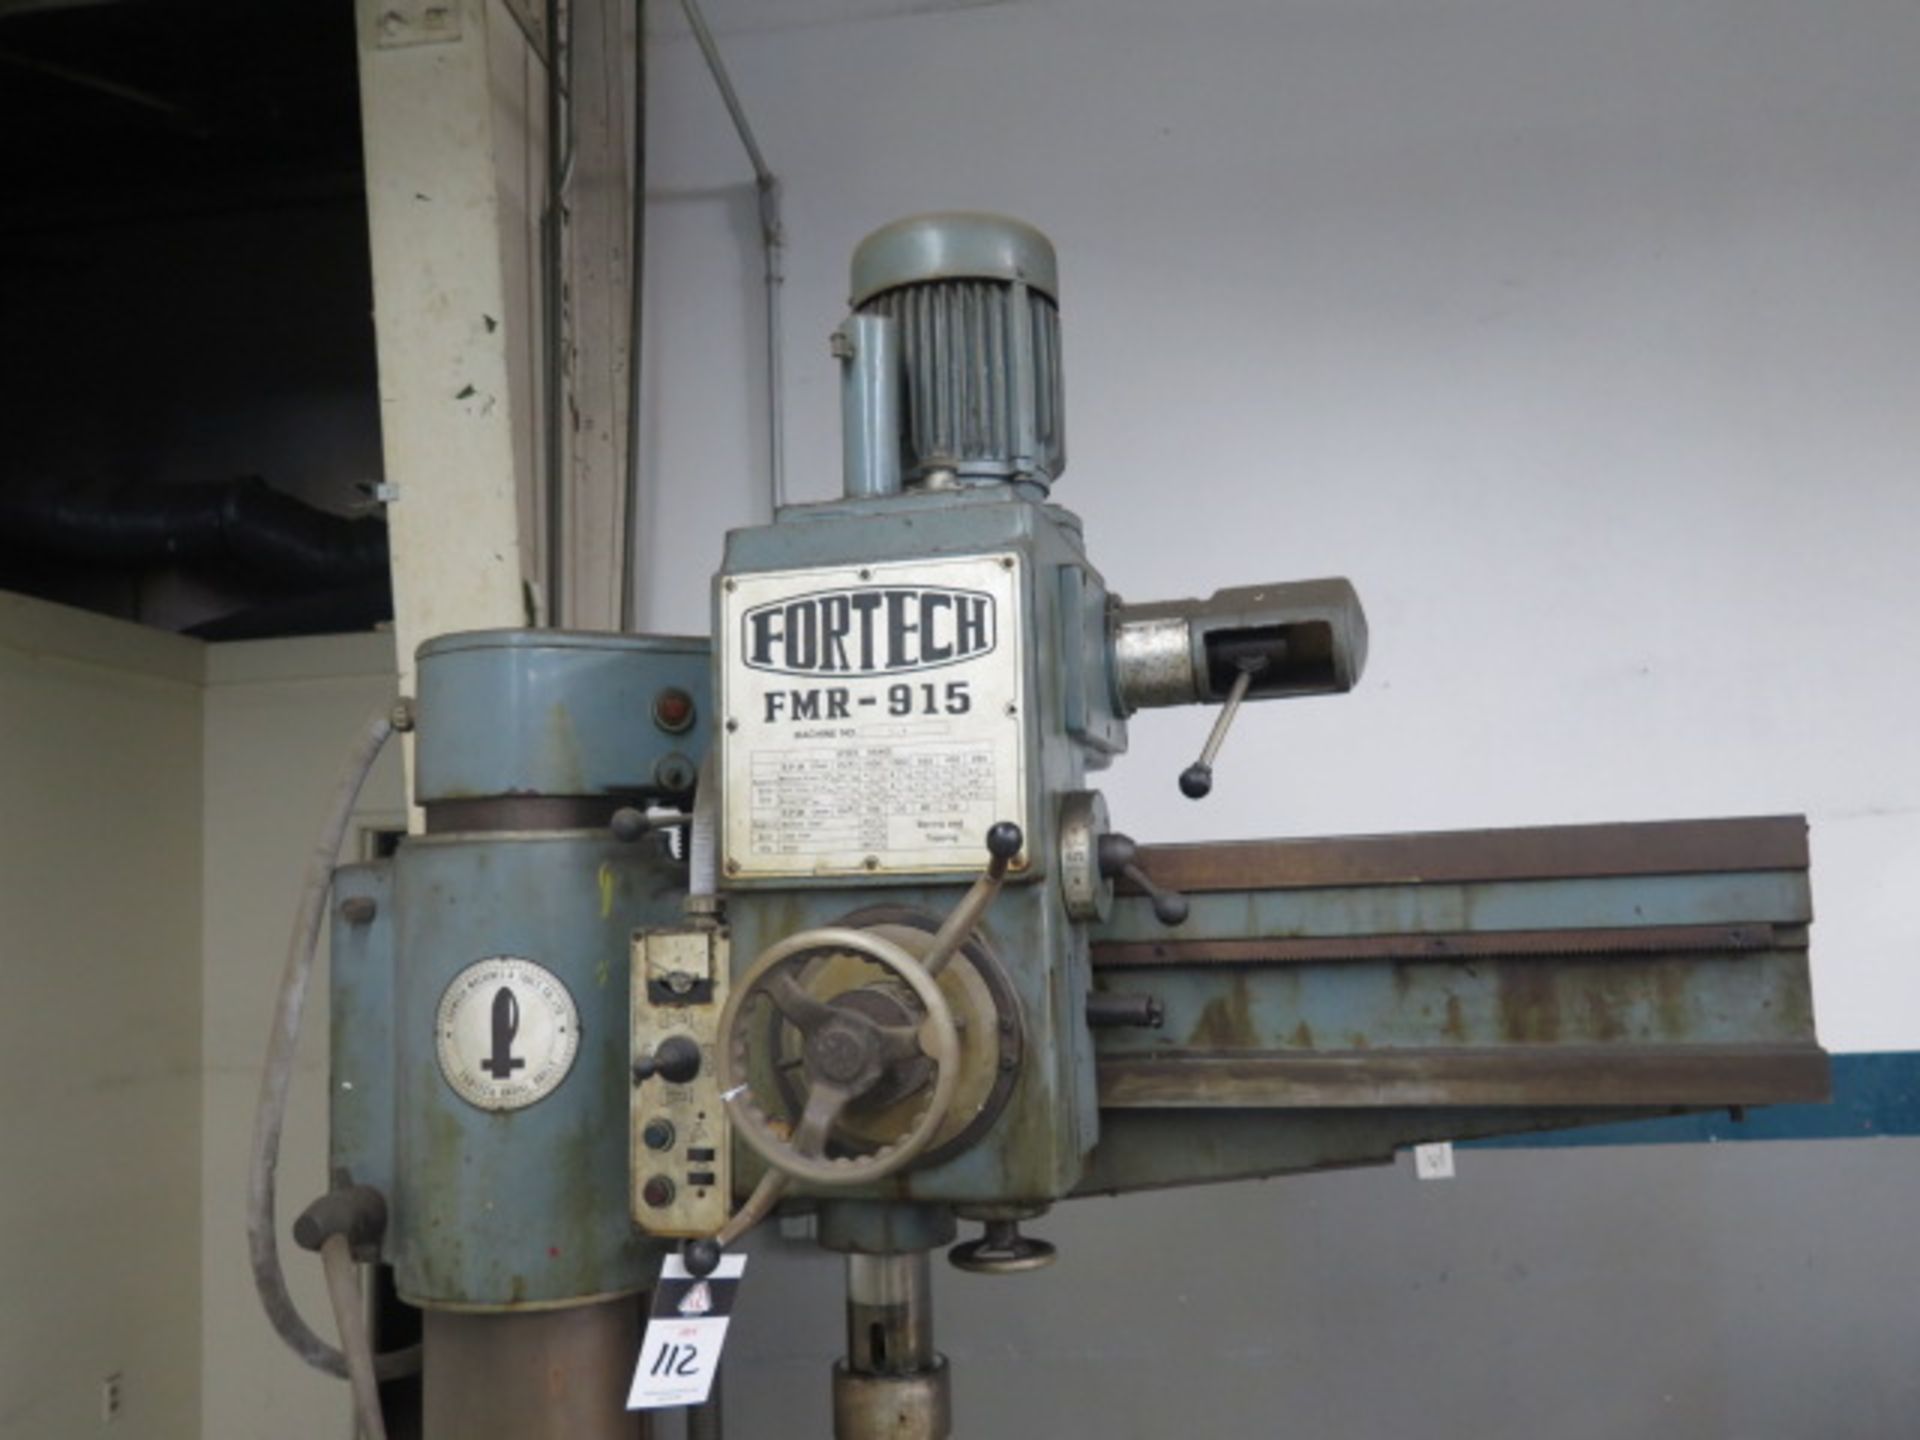 Fortech FMR-915 8” Column x 24” Radial Arm Drill s/n 166 w/ 50-1500 RPM, Power Column and Feeds, 21” - Image 2 of 8